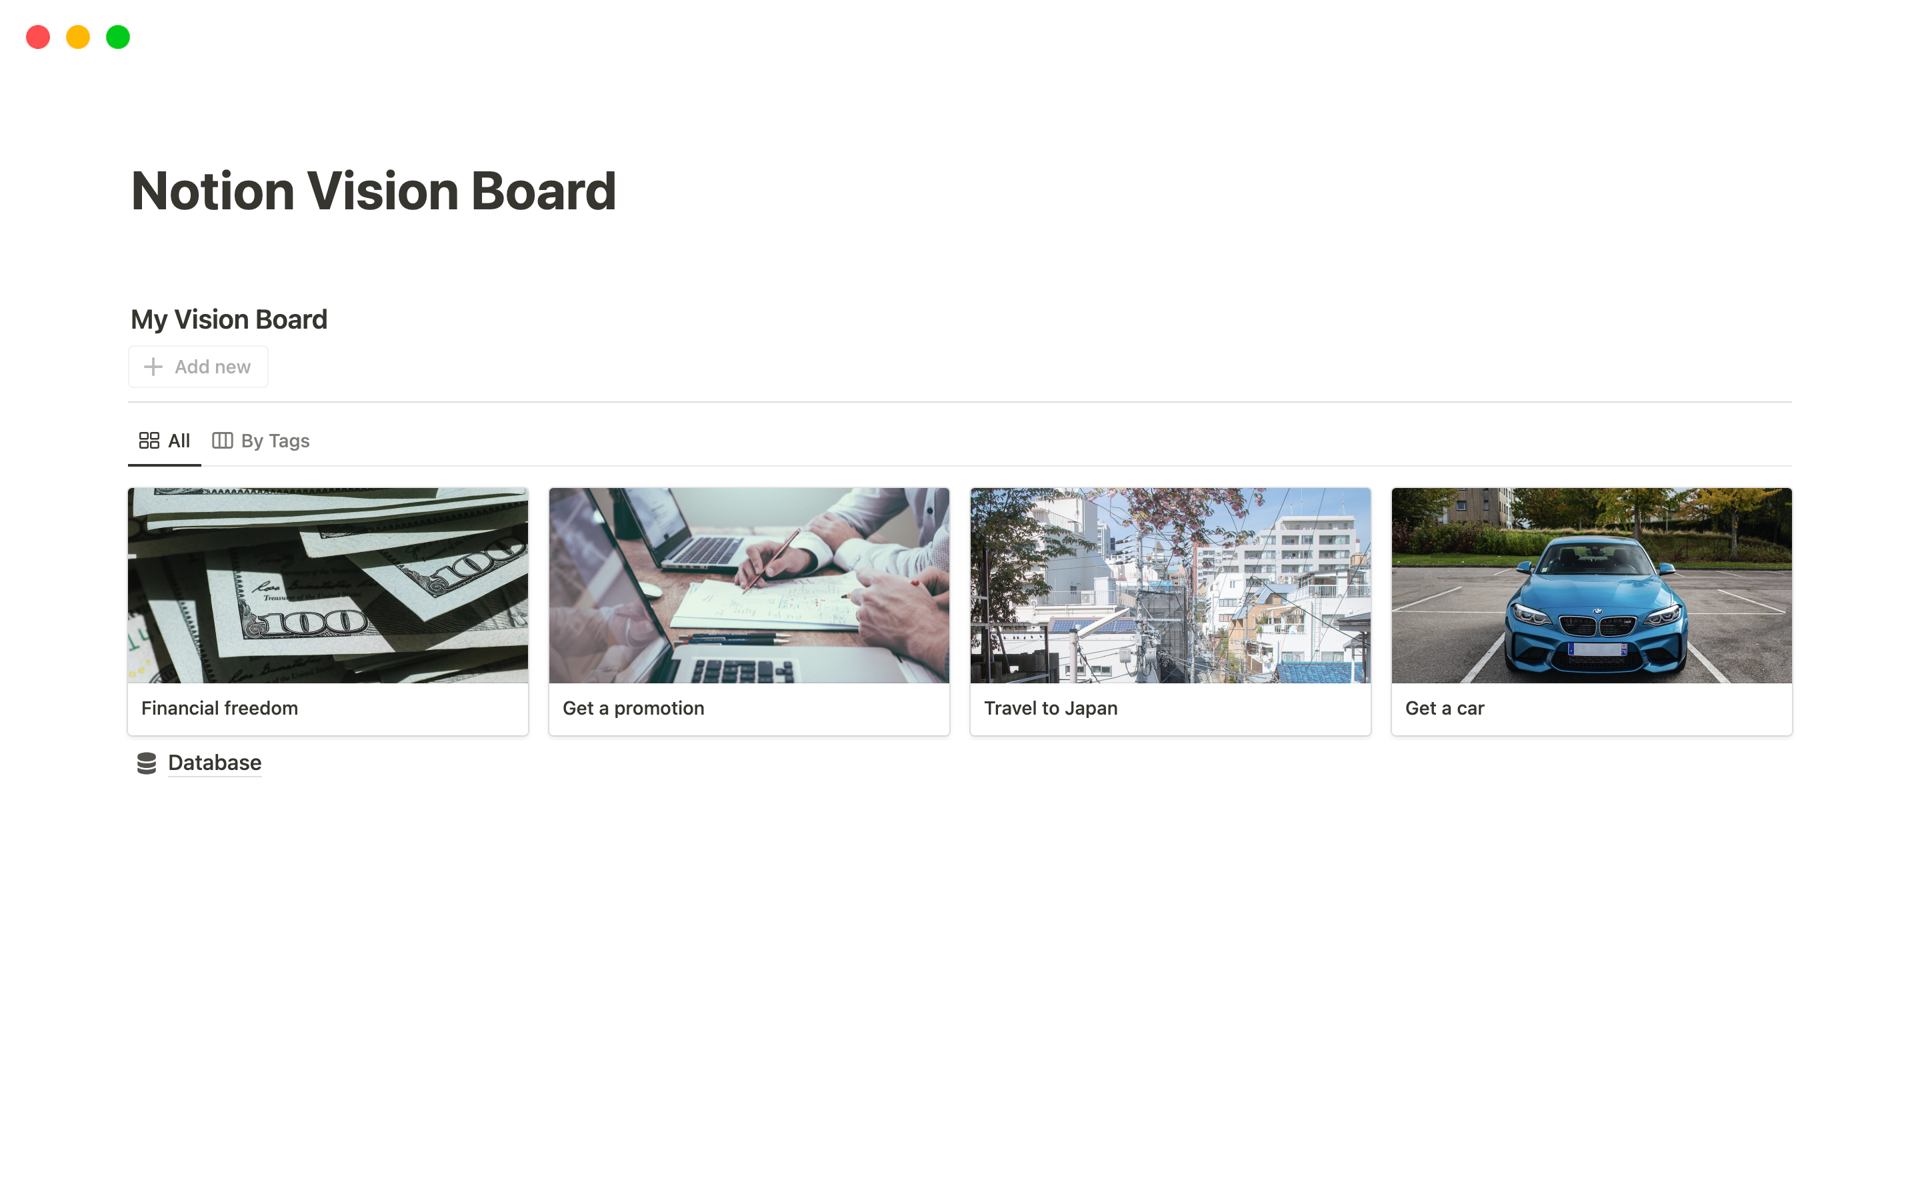 This digital vision board template allows you to visually represent your goals.